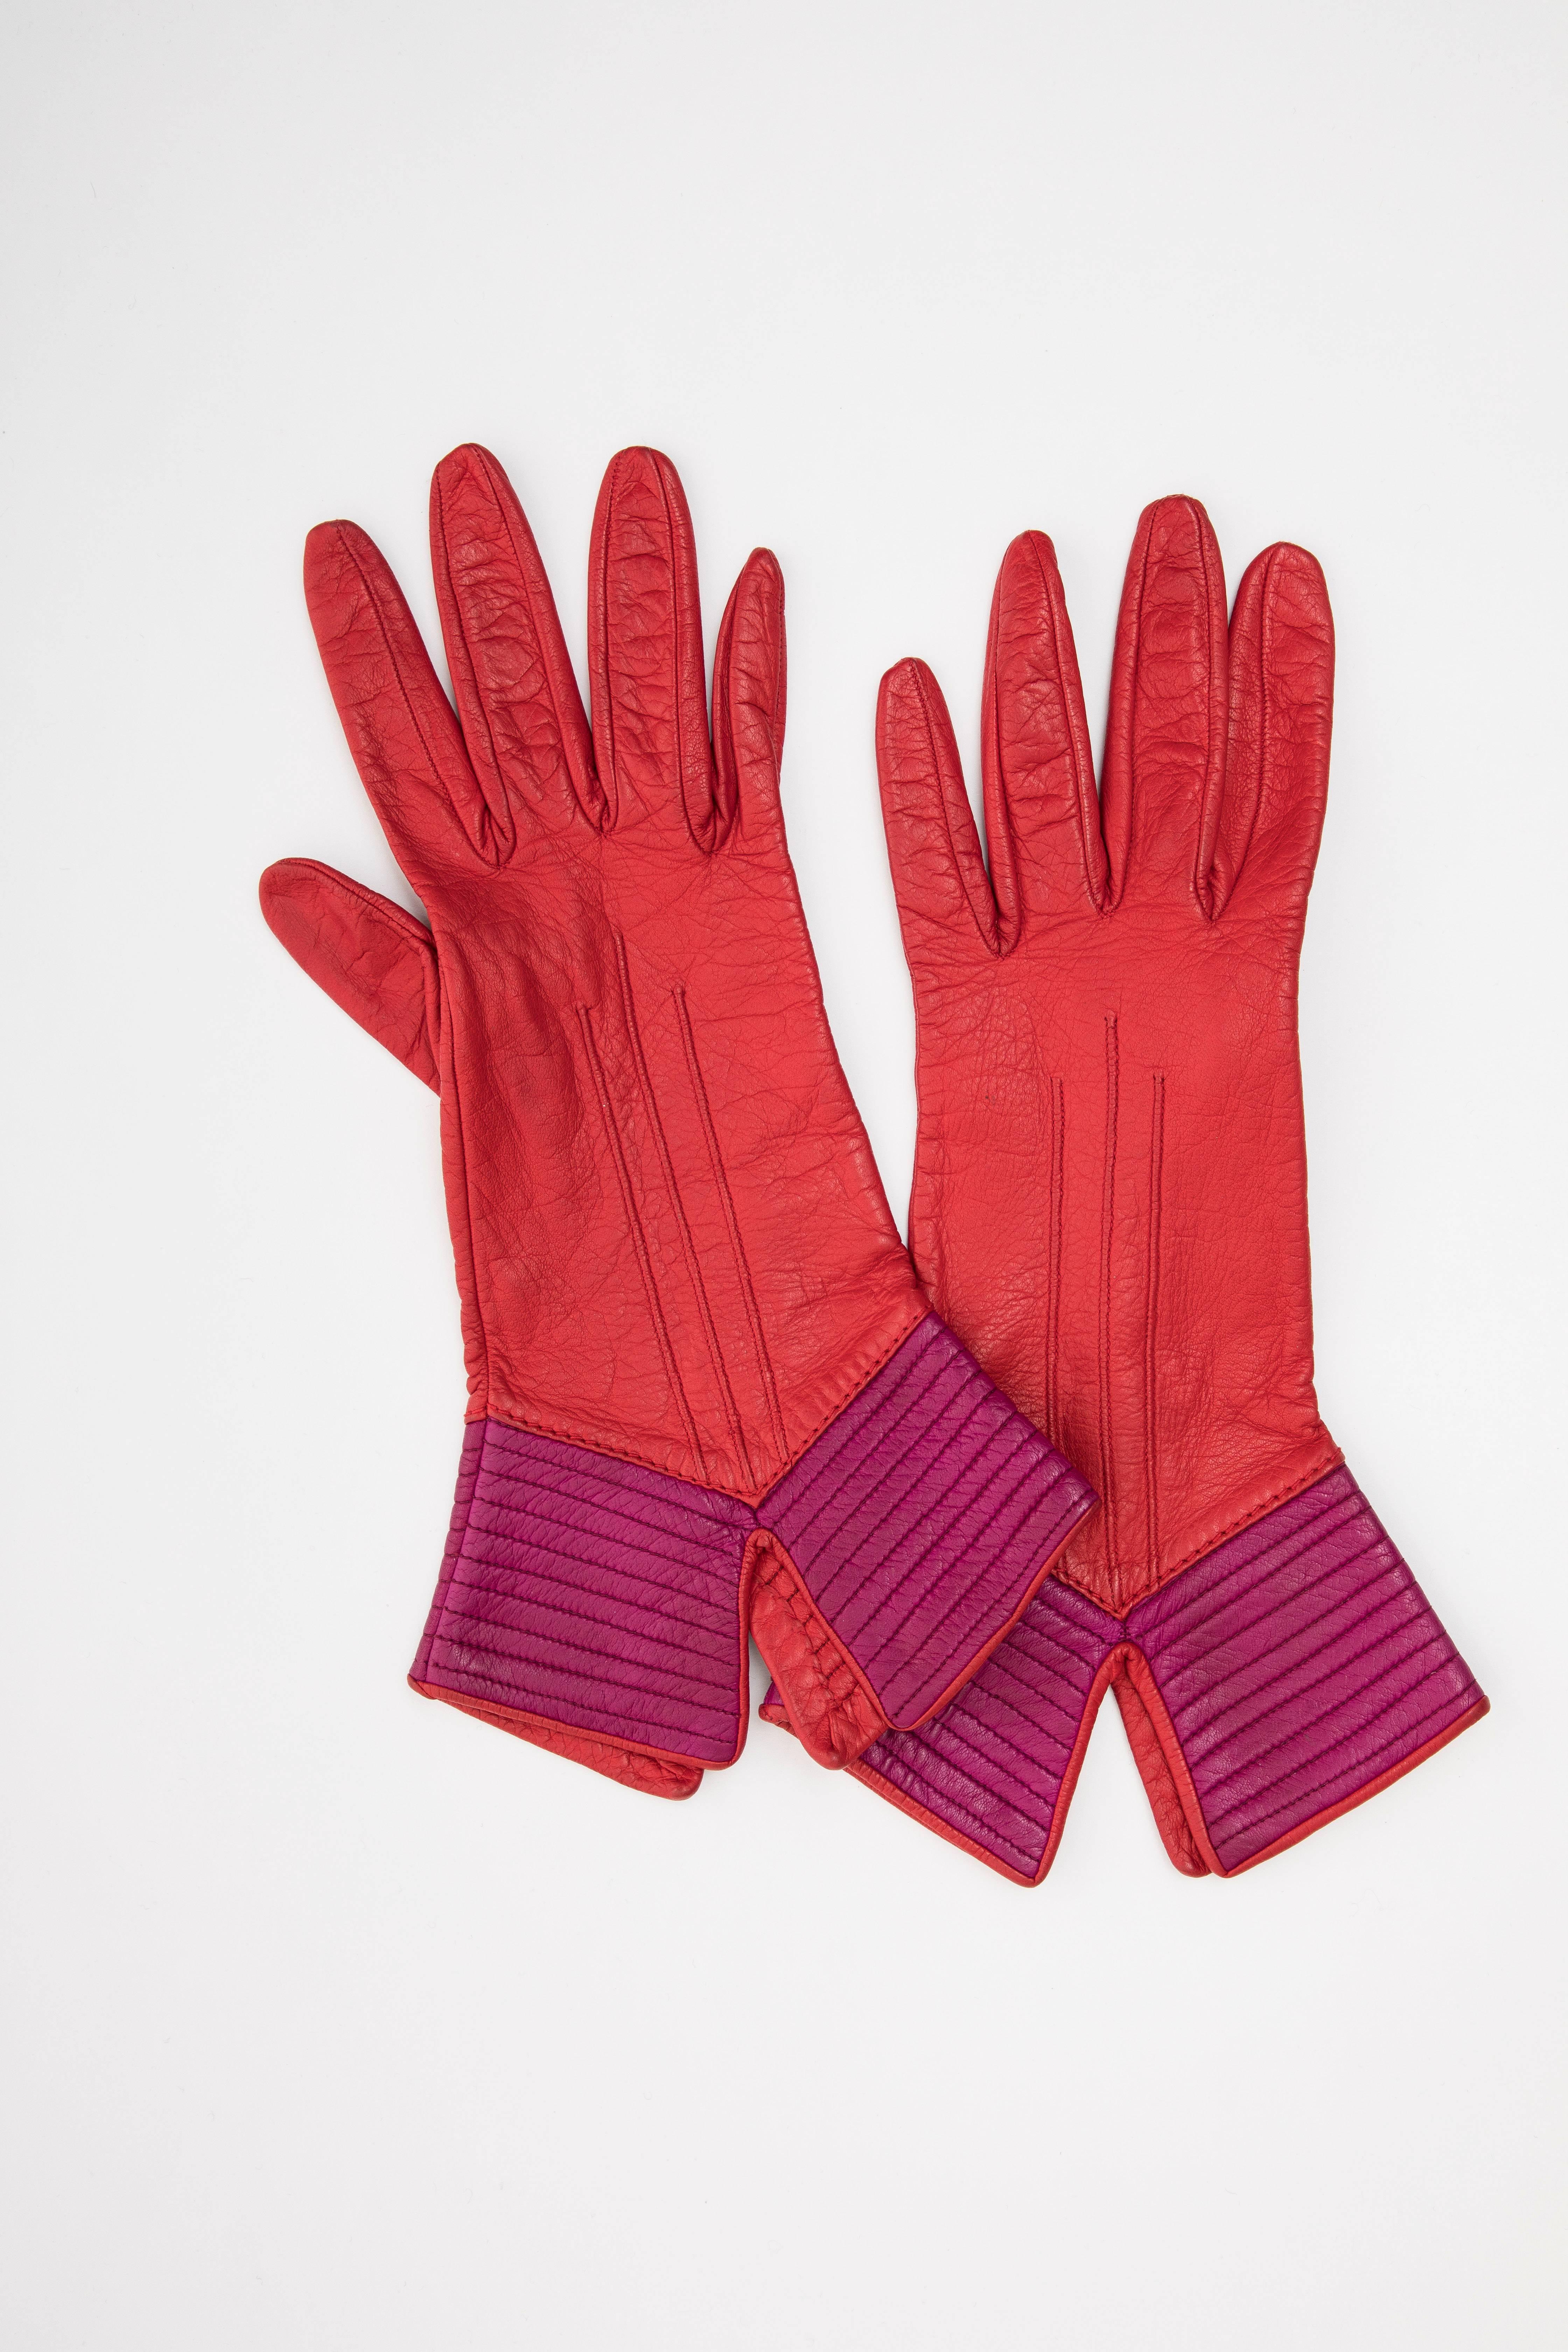 ysl red leather gloves